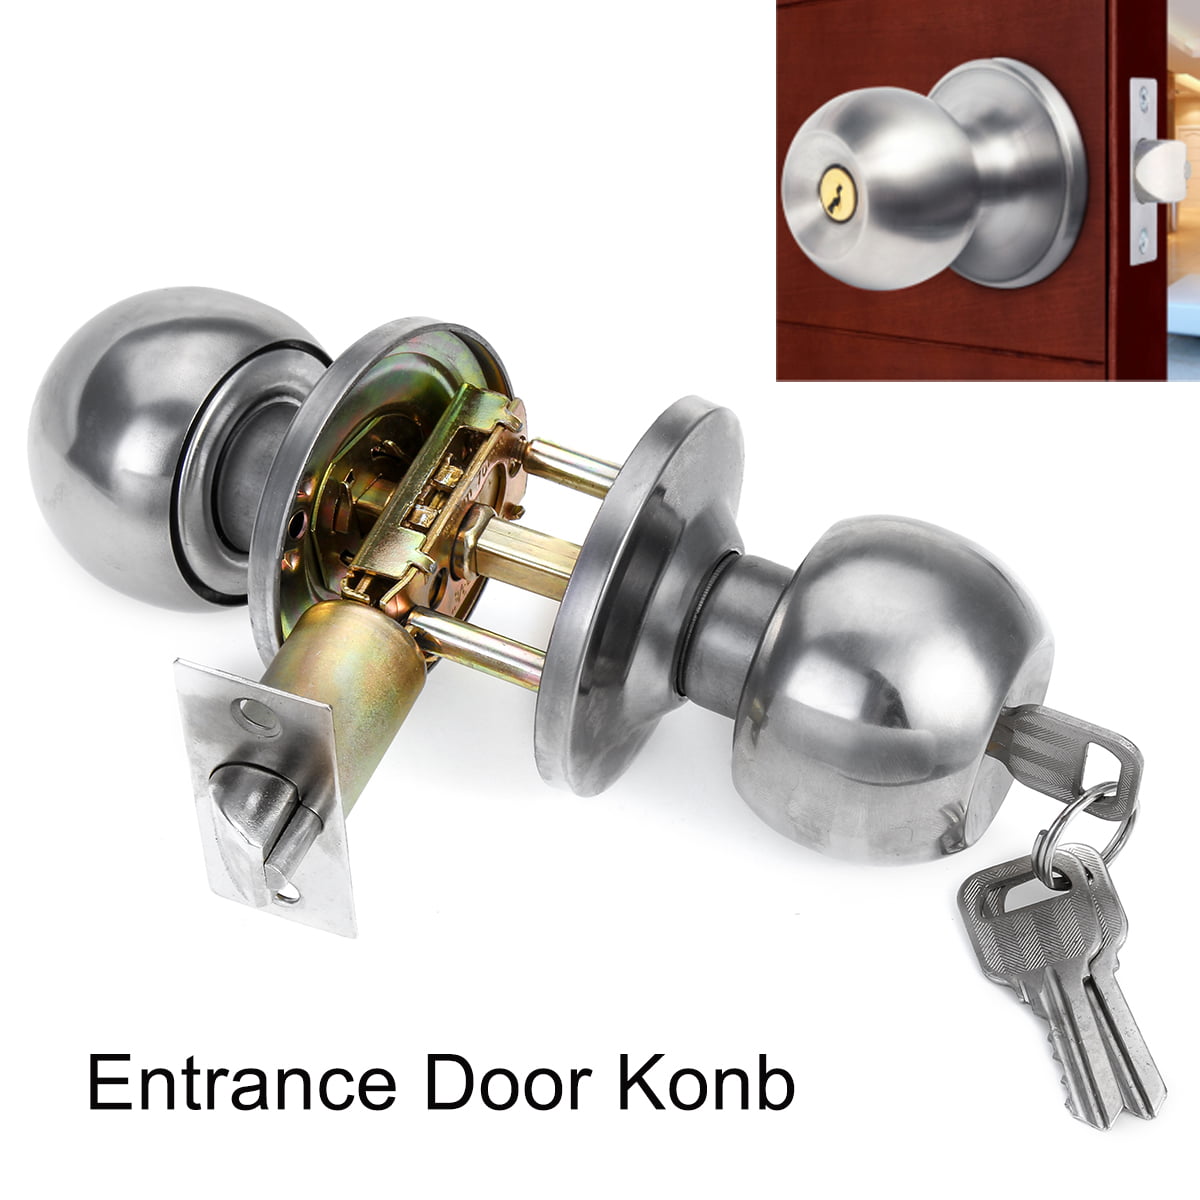 5 x STAINLESS STEEL KEYED ENTRANCE MORTICE DOOR KNOB SET with INTERNAL LOCK 